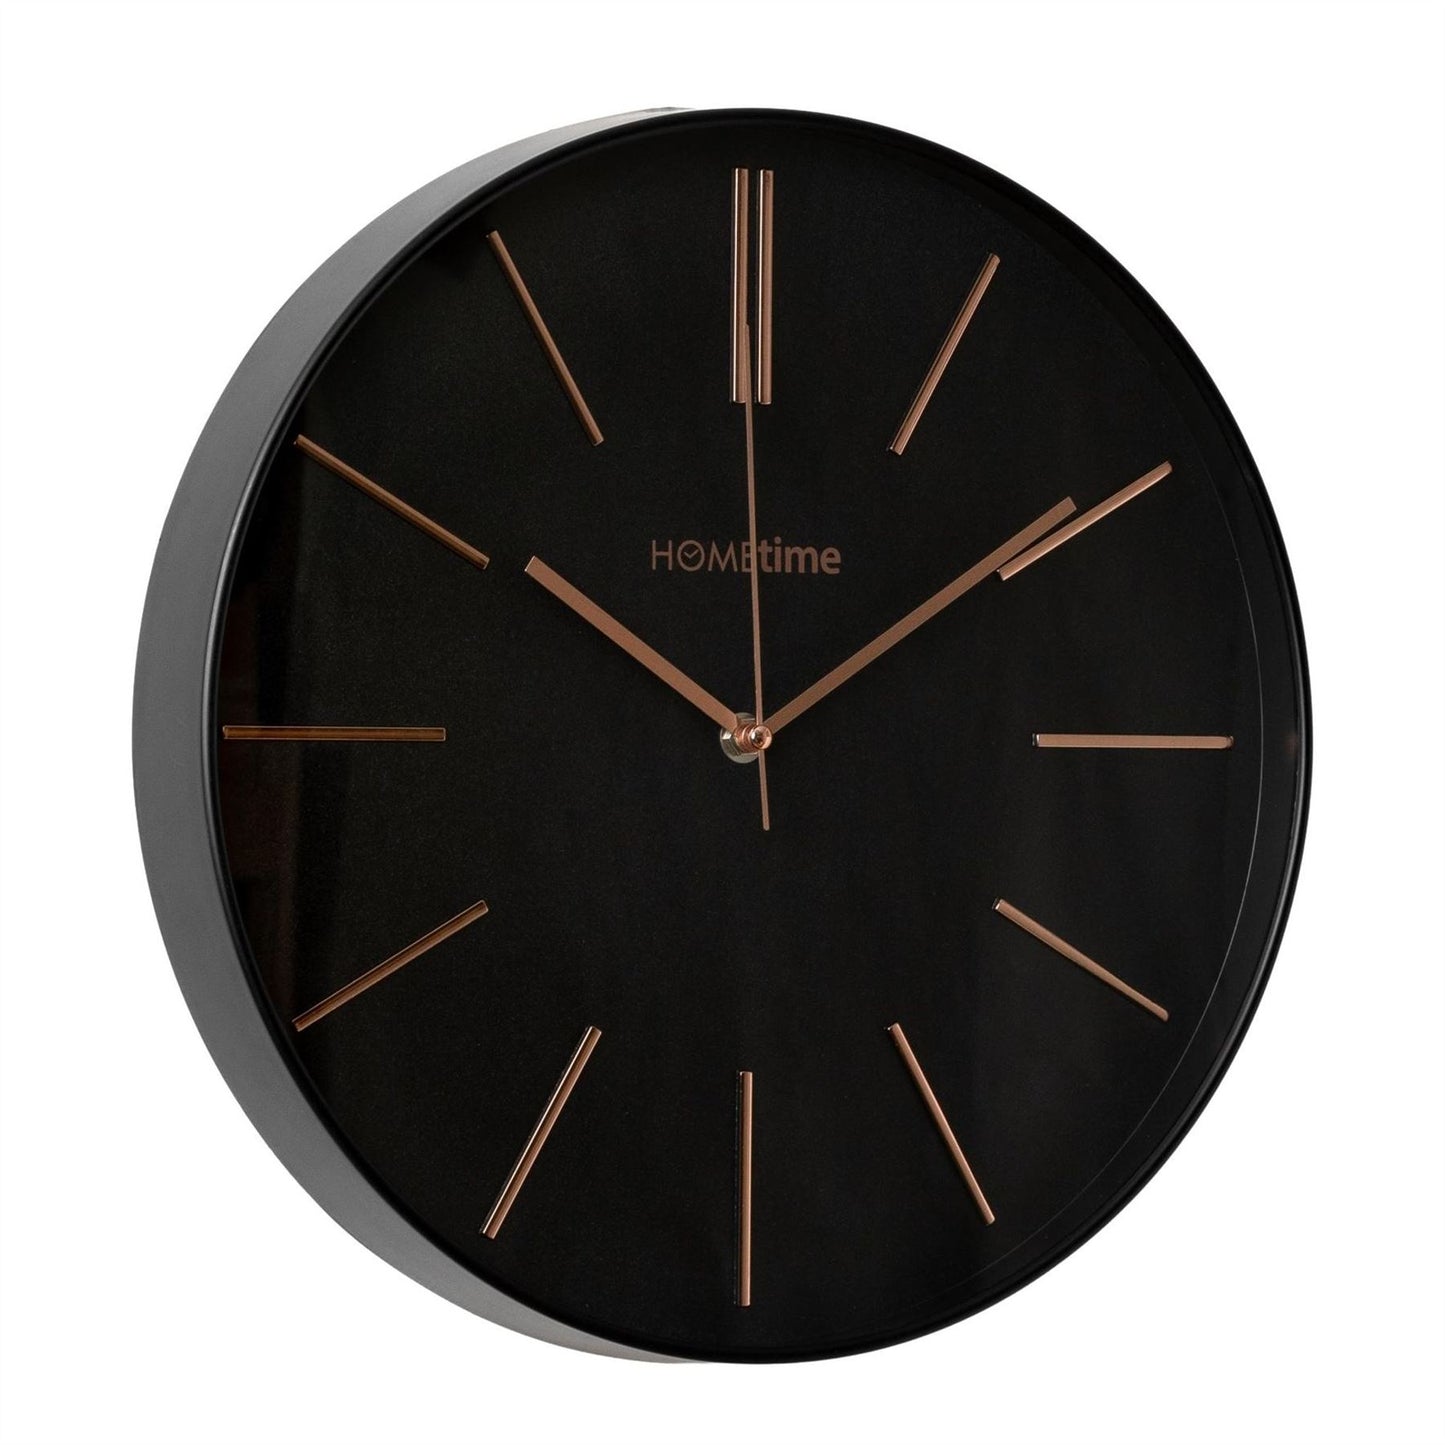 Hometime Round Wall Clock 14" Dial - Black